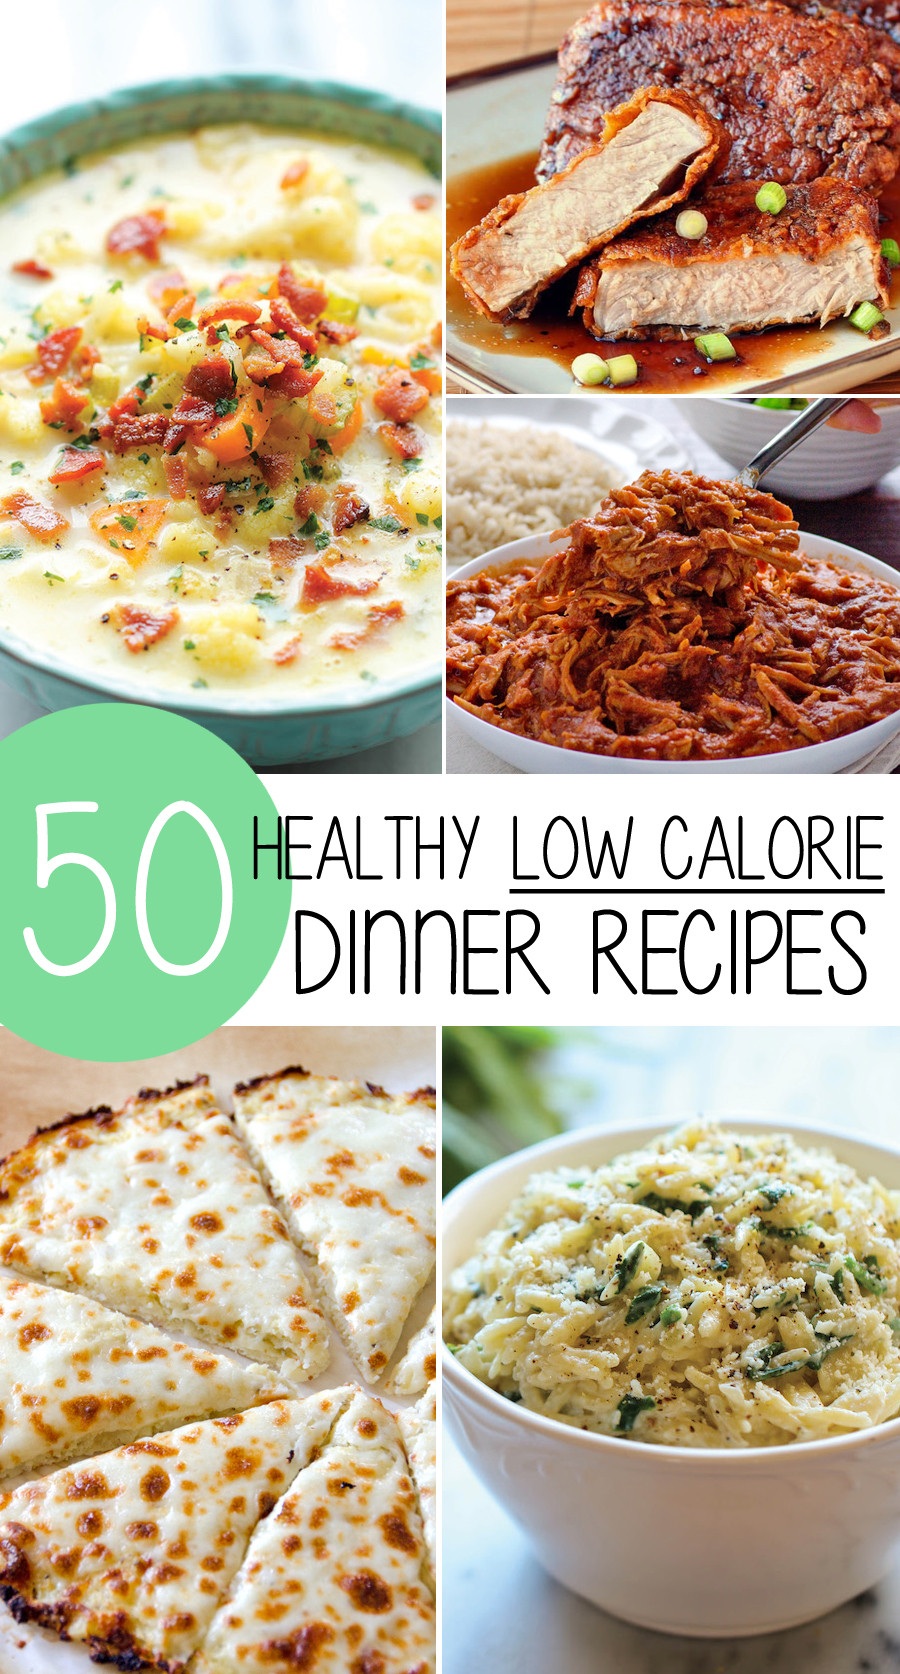 Easy Low Calorie Dinners
 50 Healthy Low Calorie Weight Loss Dinner Recipes